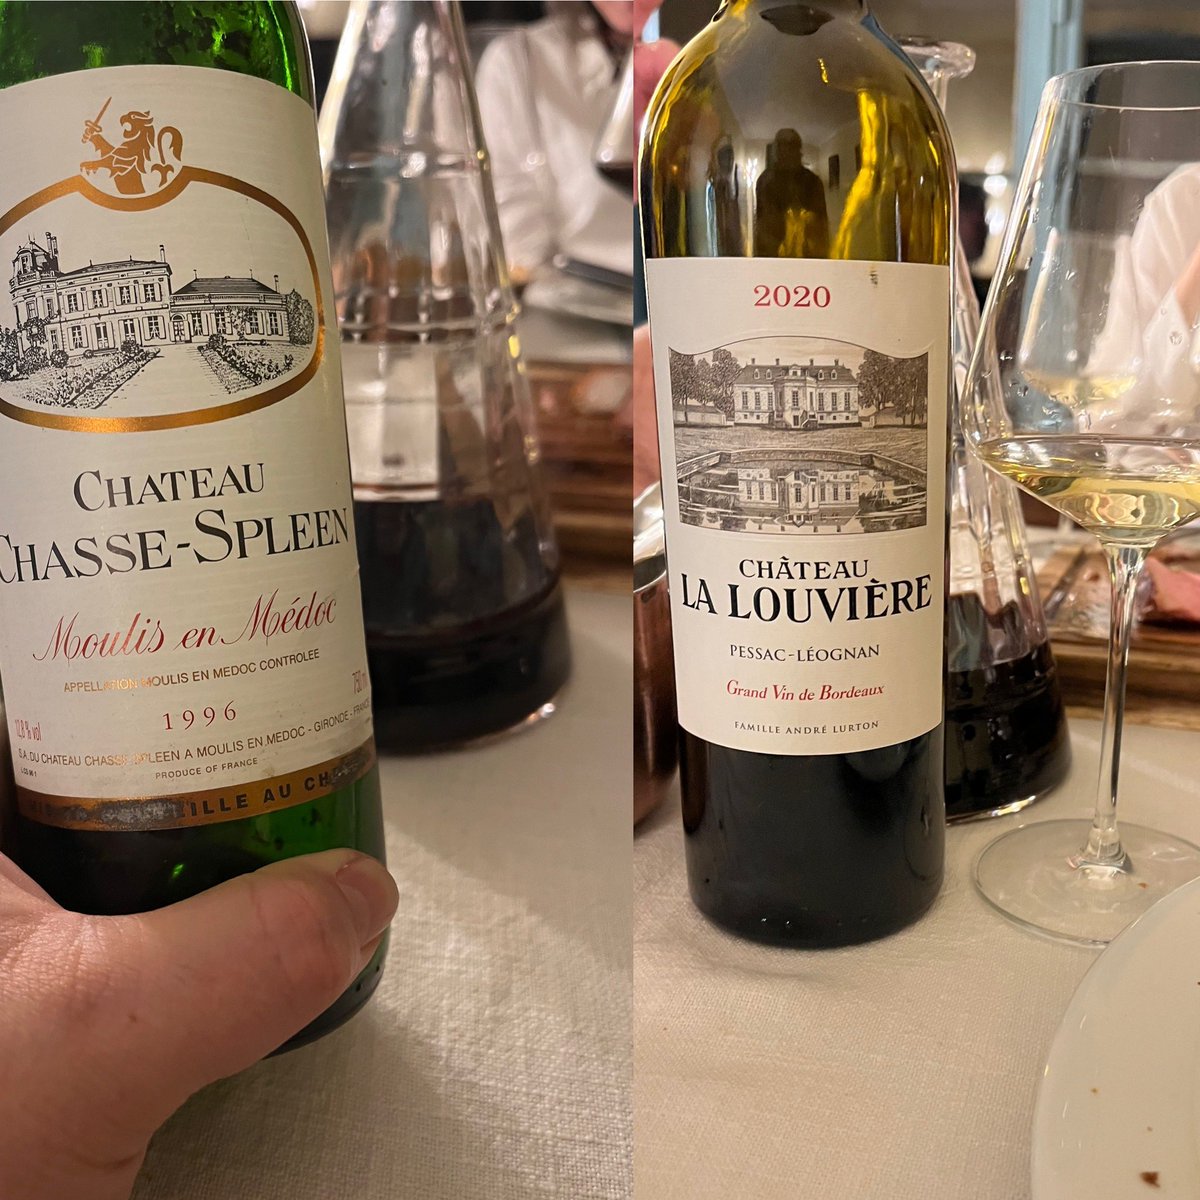 #vins Sips of great quality duo & affordable ones #bordeauxwines #chassespleen1996 #chateauLaLouviere2020 have u ever try them? @thewinetattoo @RealWineGuru @winewomansong @Liam3494 @MatthewSJukes @JeremyPalmer7 @jules_mahon @JRCX @AugustoSaracco @gailbenzler @KitchenSprout #BDX